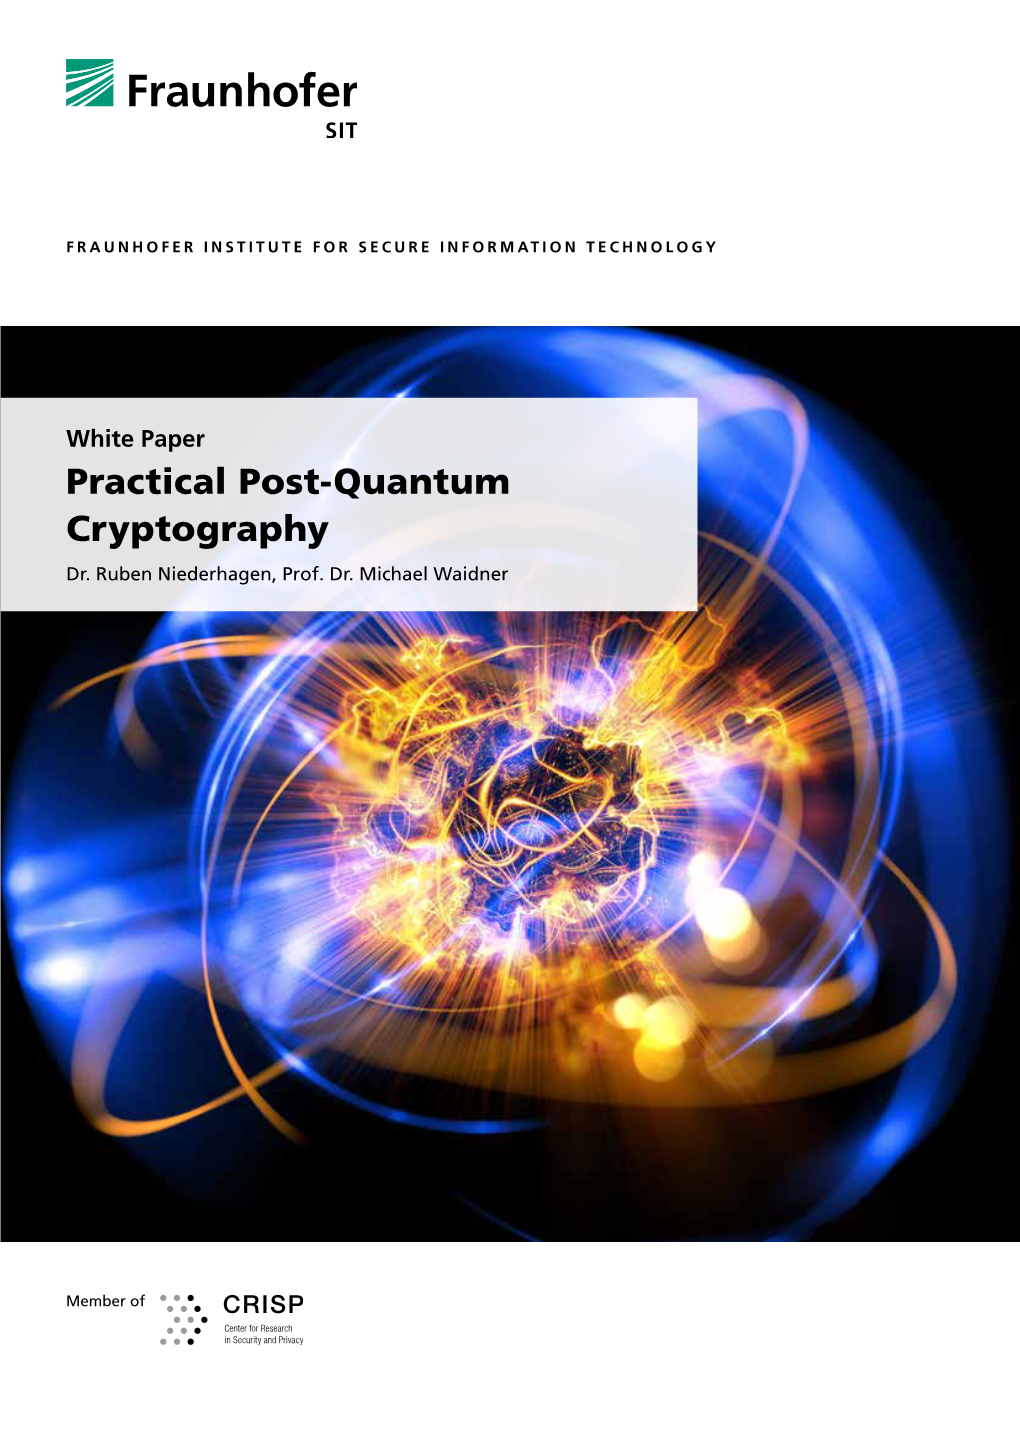 Releases Practical Post-Quantum Cryptography